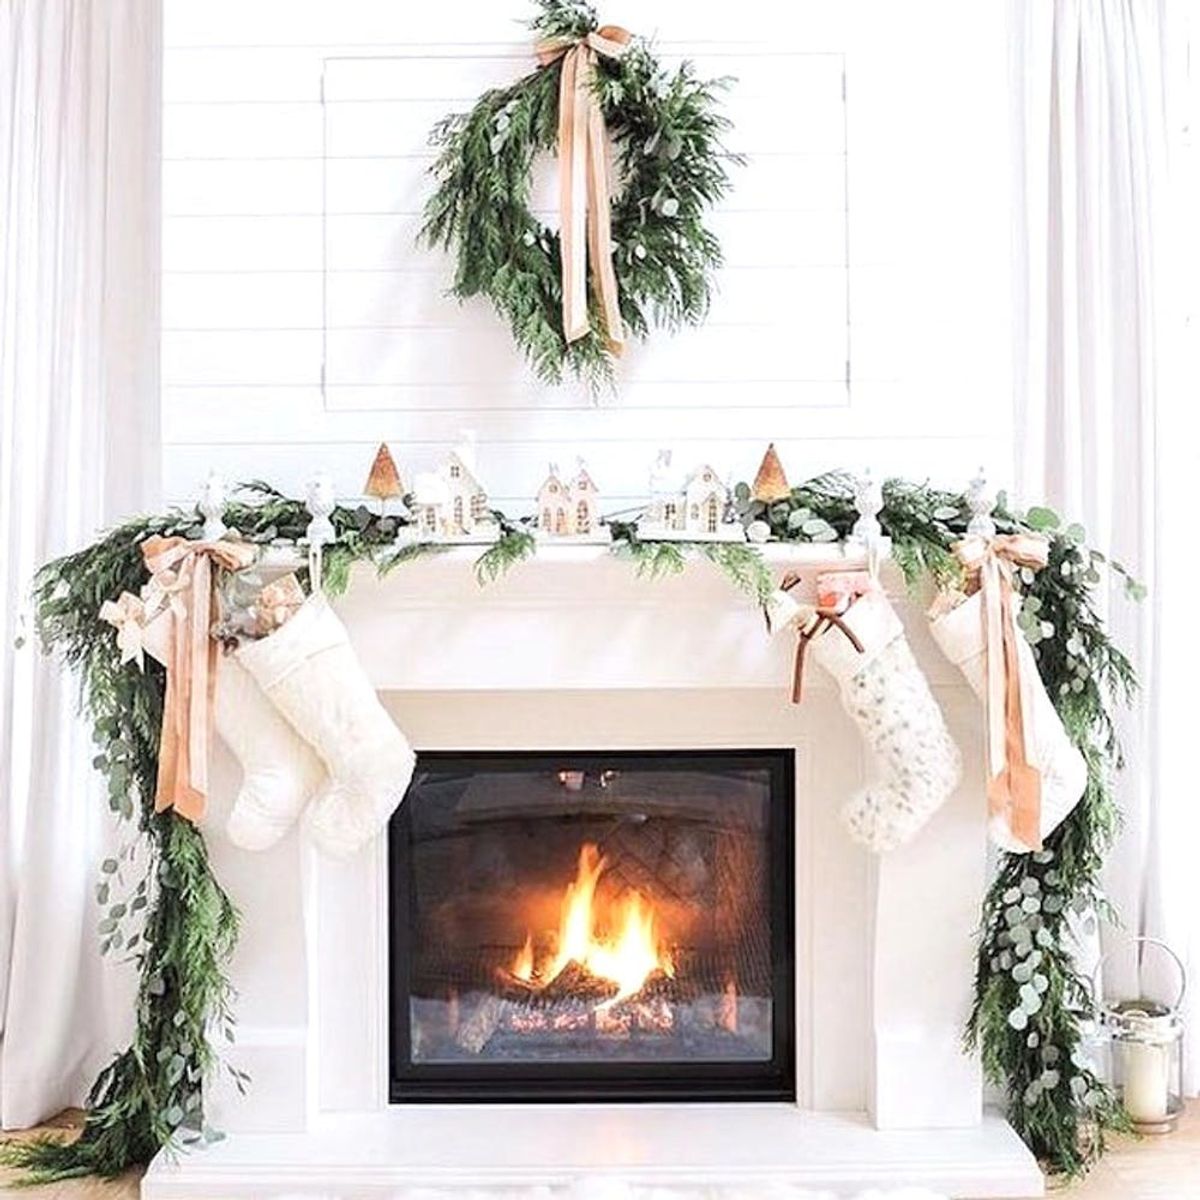 The Holiday Farmhouse Decor Trend We’re Copying from Instagram